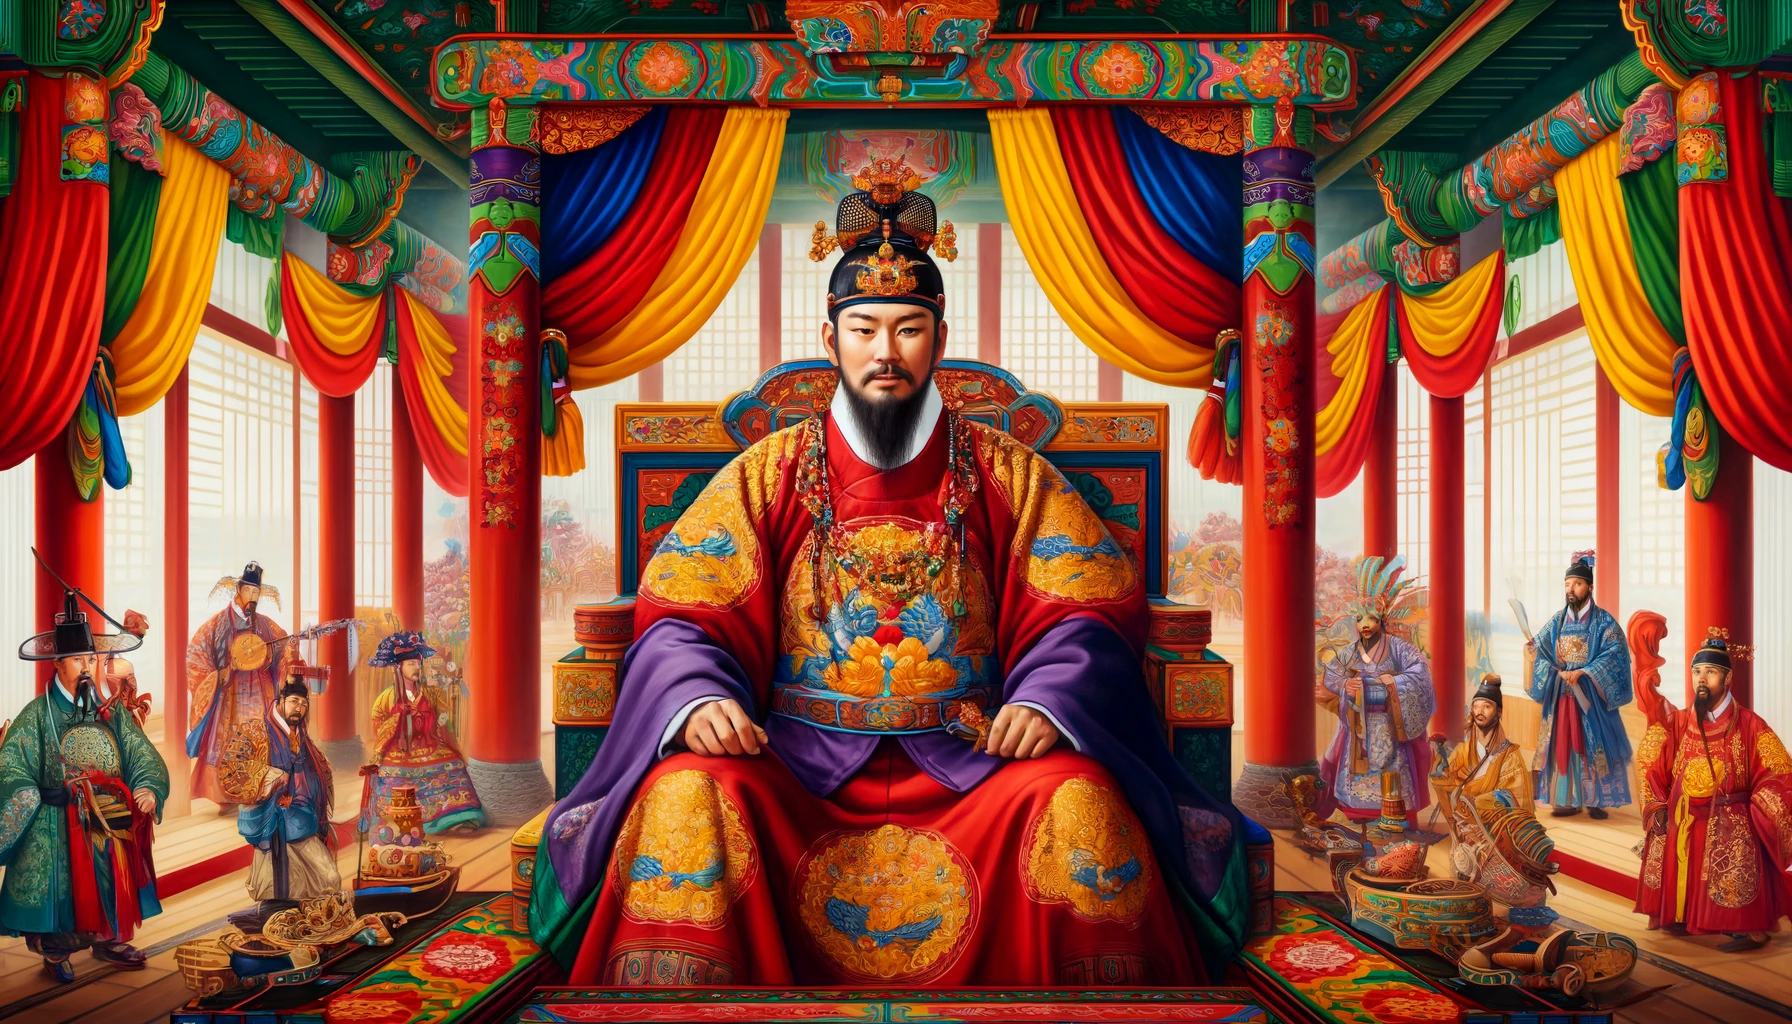 King Tejo of Goryeo Kingdom united the various kingdoms of the Korean peninsula and established a stable and prosperous dynasty that lasted for centuries.